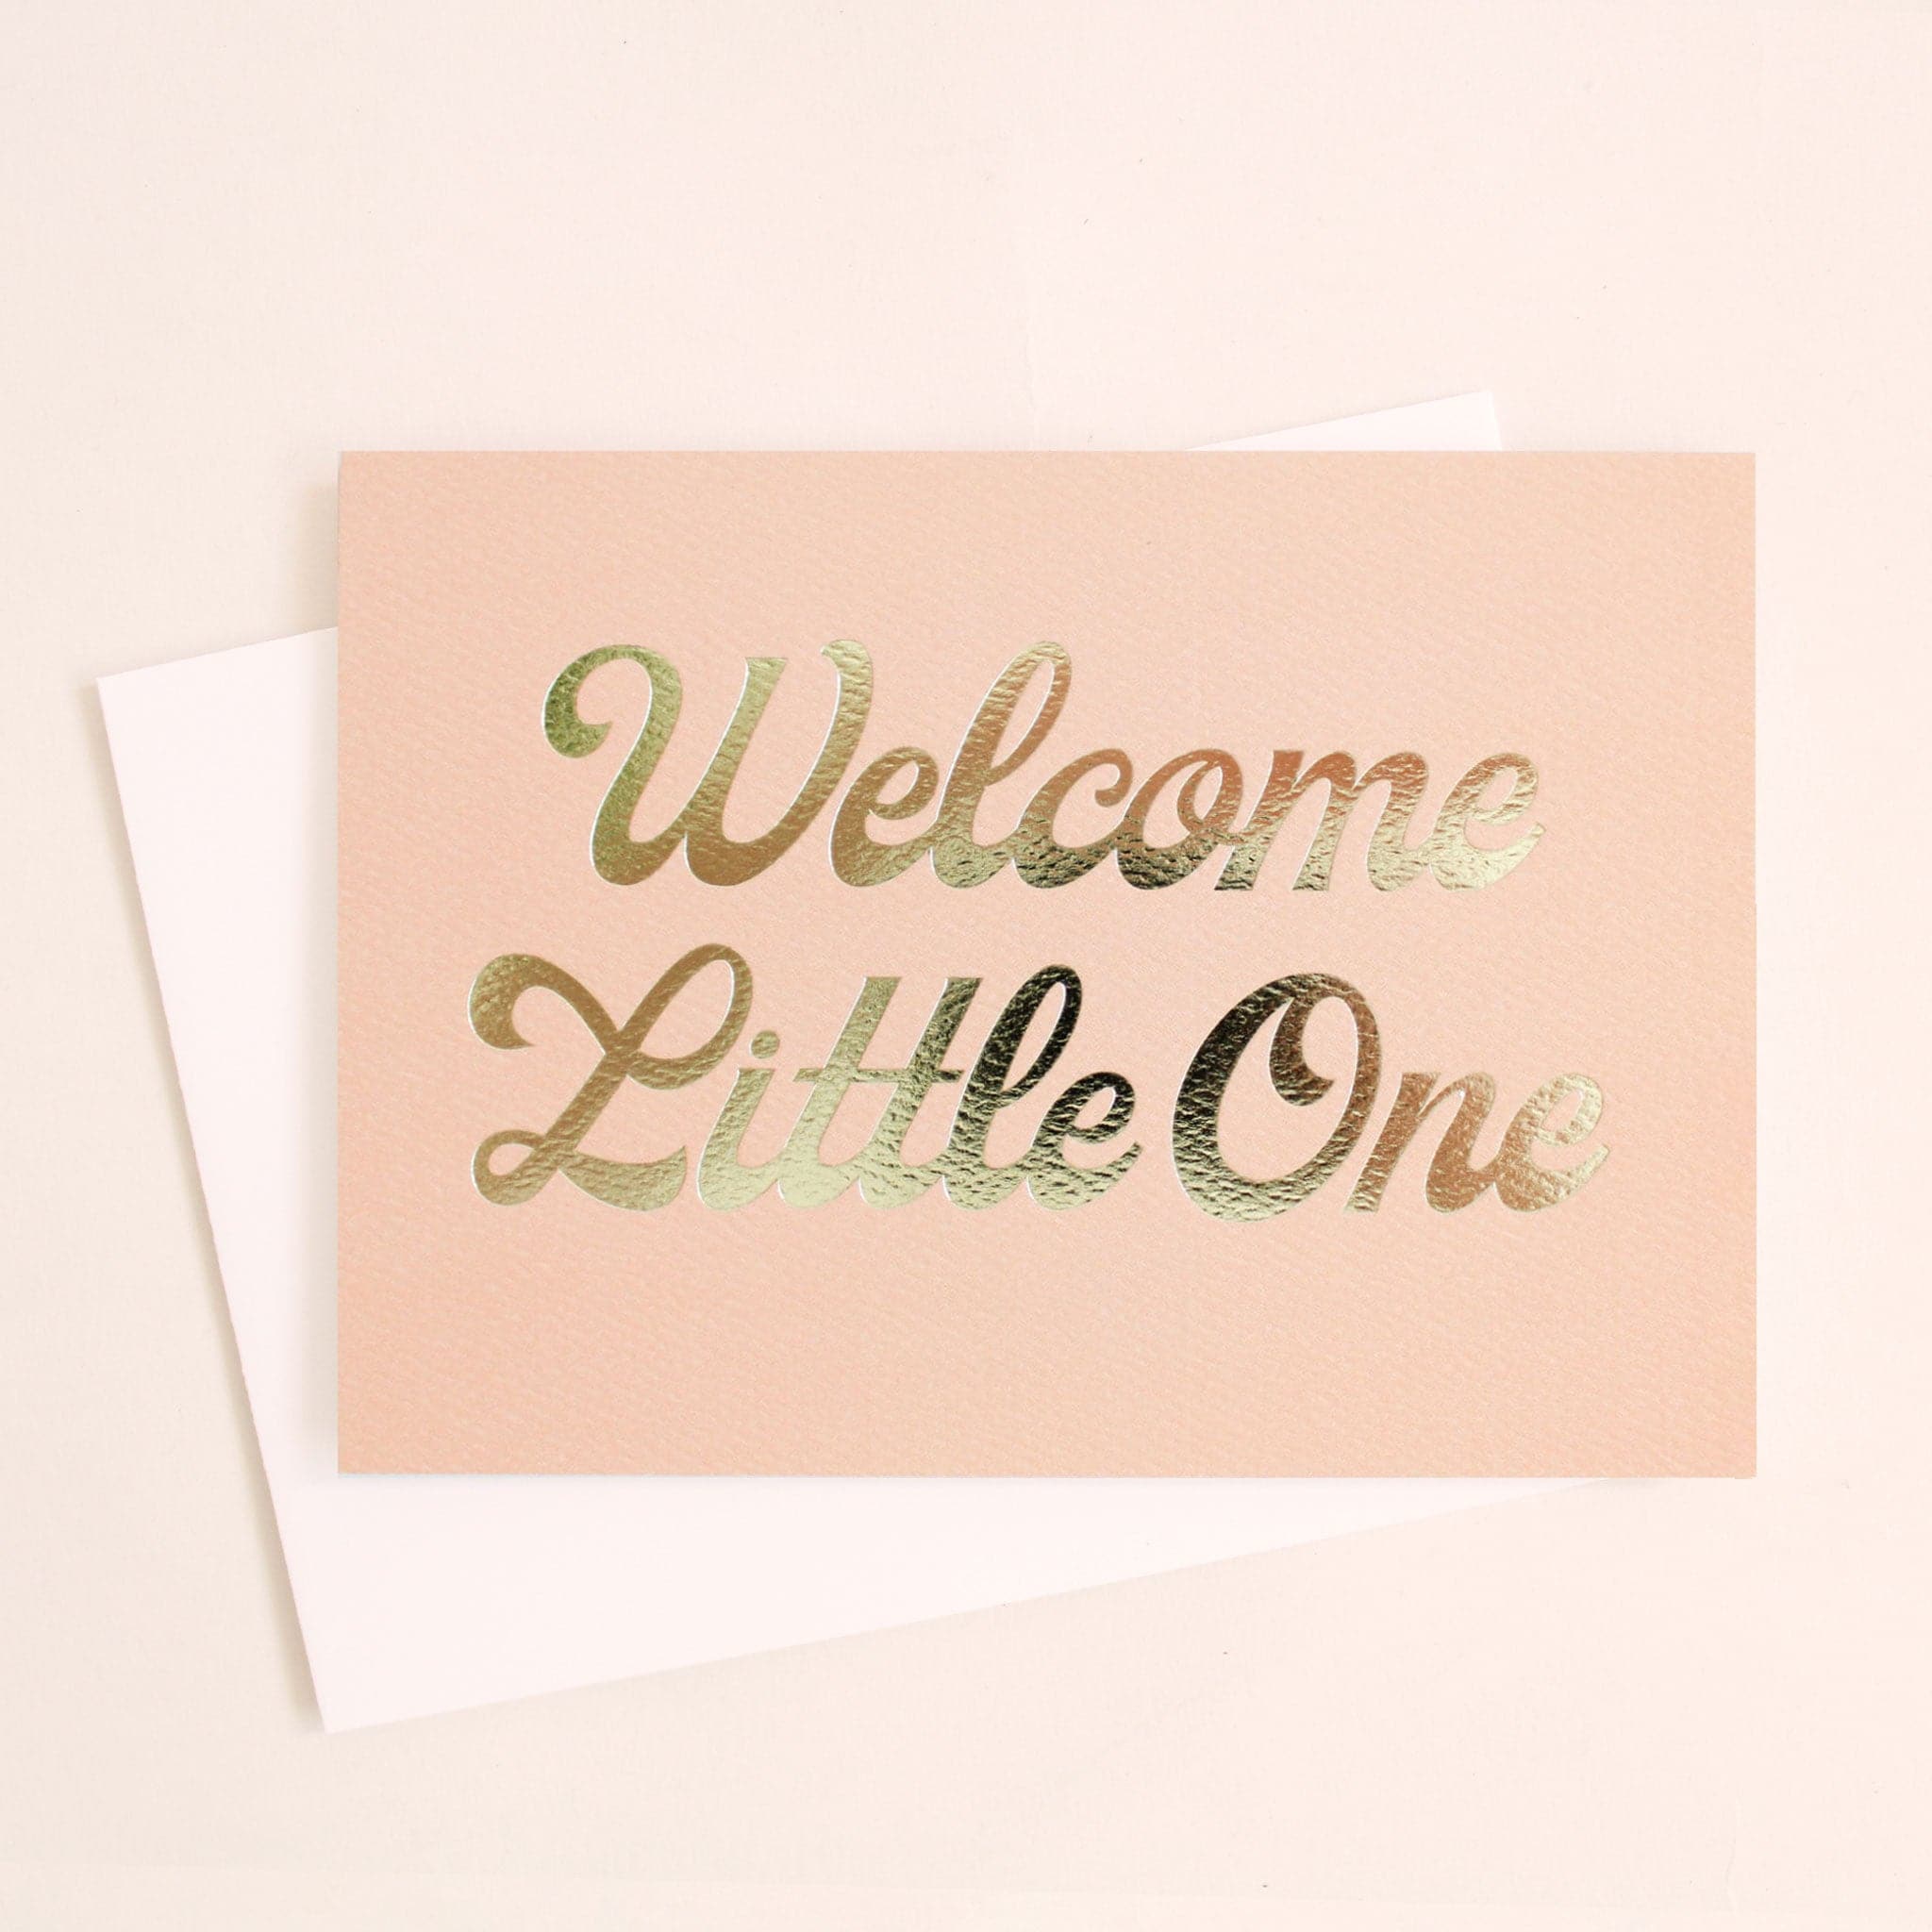 This card is a cloud peach color and reads &#39;Welcome Little One&#39; in gold foil cursive lettering. The text takes up majority of the card. The card is accompanied by a solid white envelope.